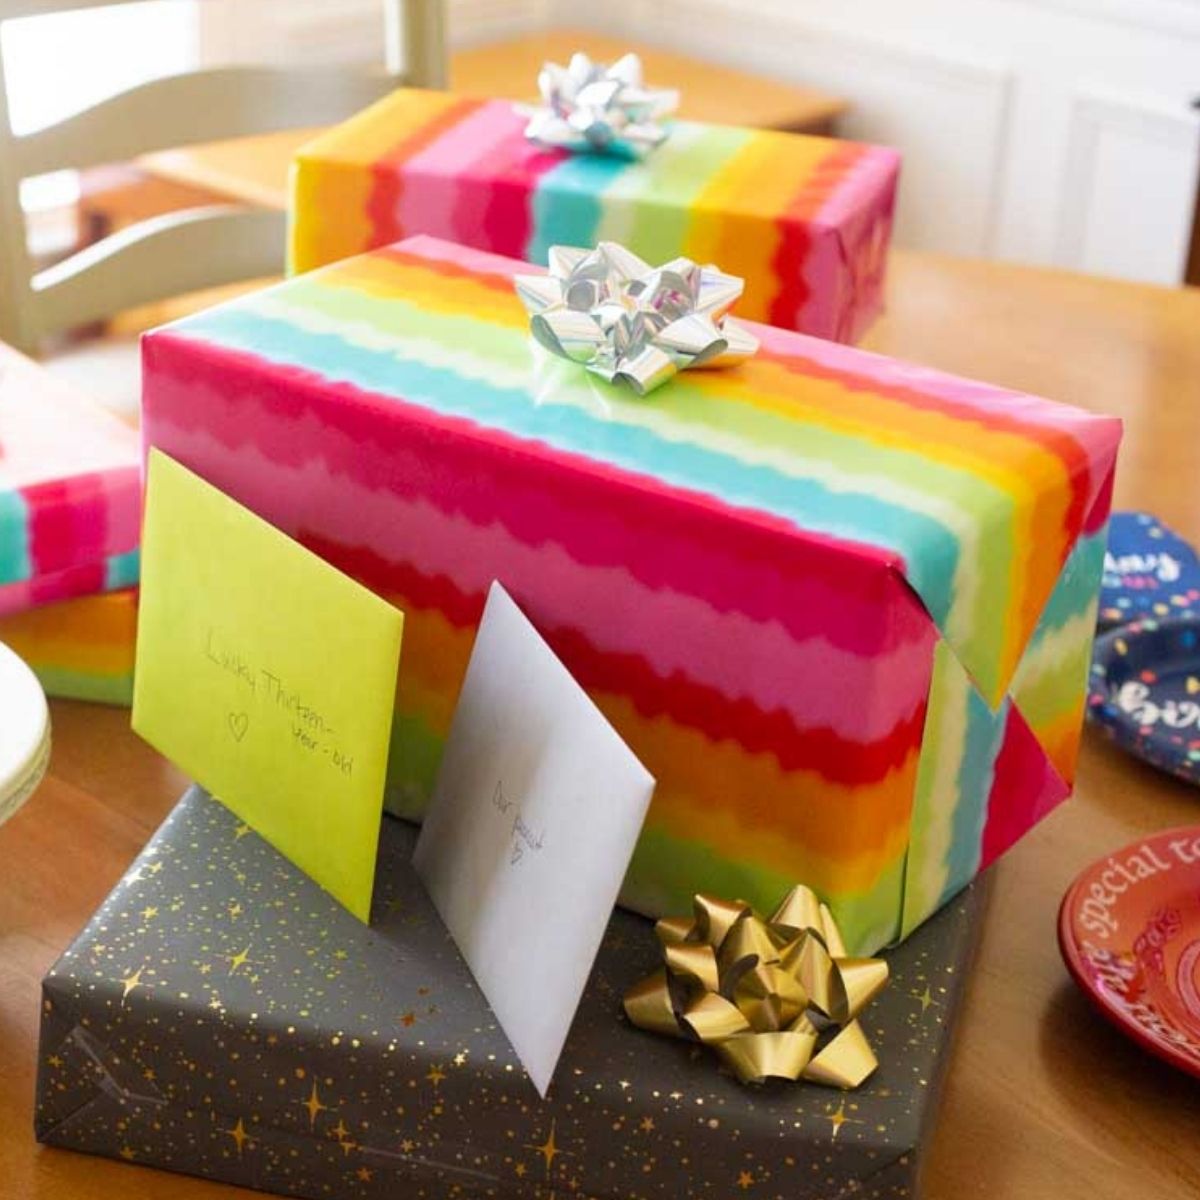 Tie dye wrapping paper birthday gifts with cards sit on a table.